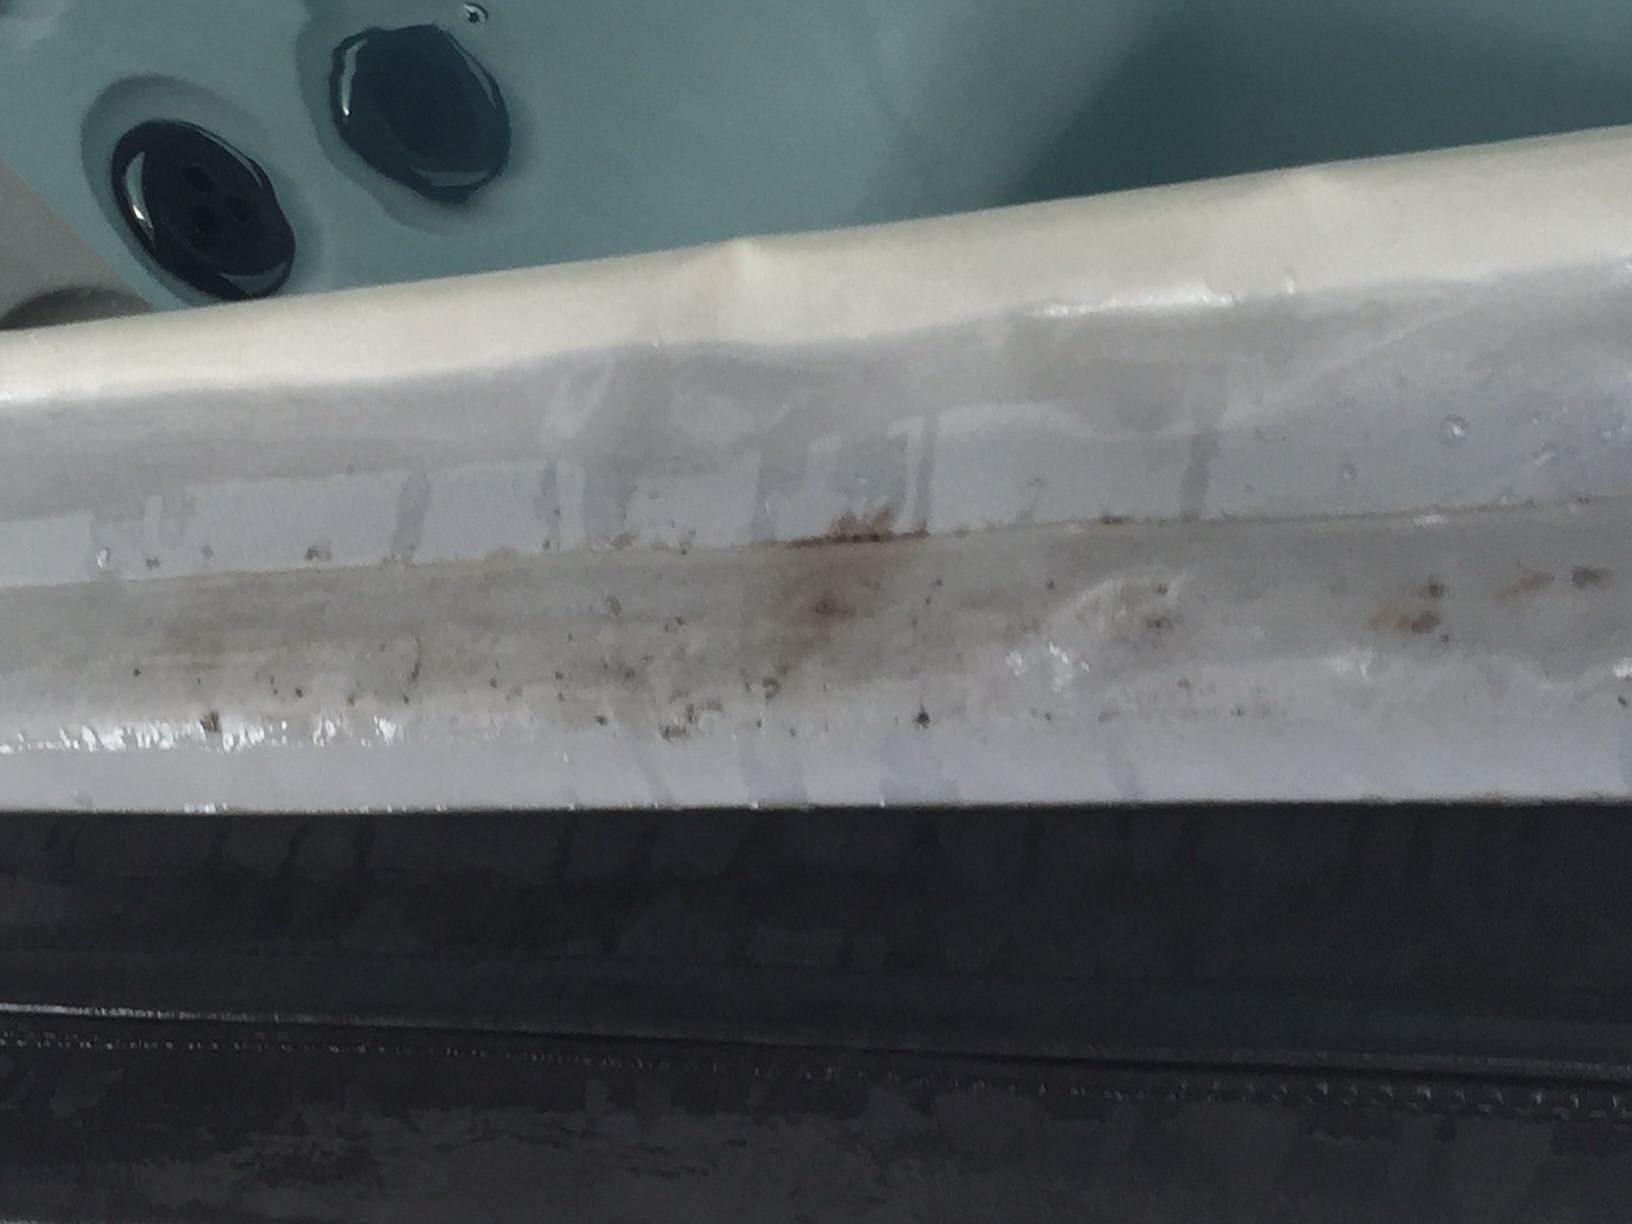 My Hot Tub Water Looks Gross! HELP! - Hot Tub and Spa care tips